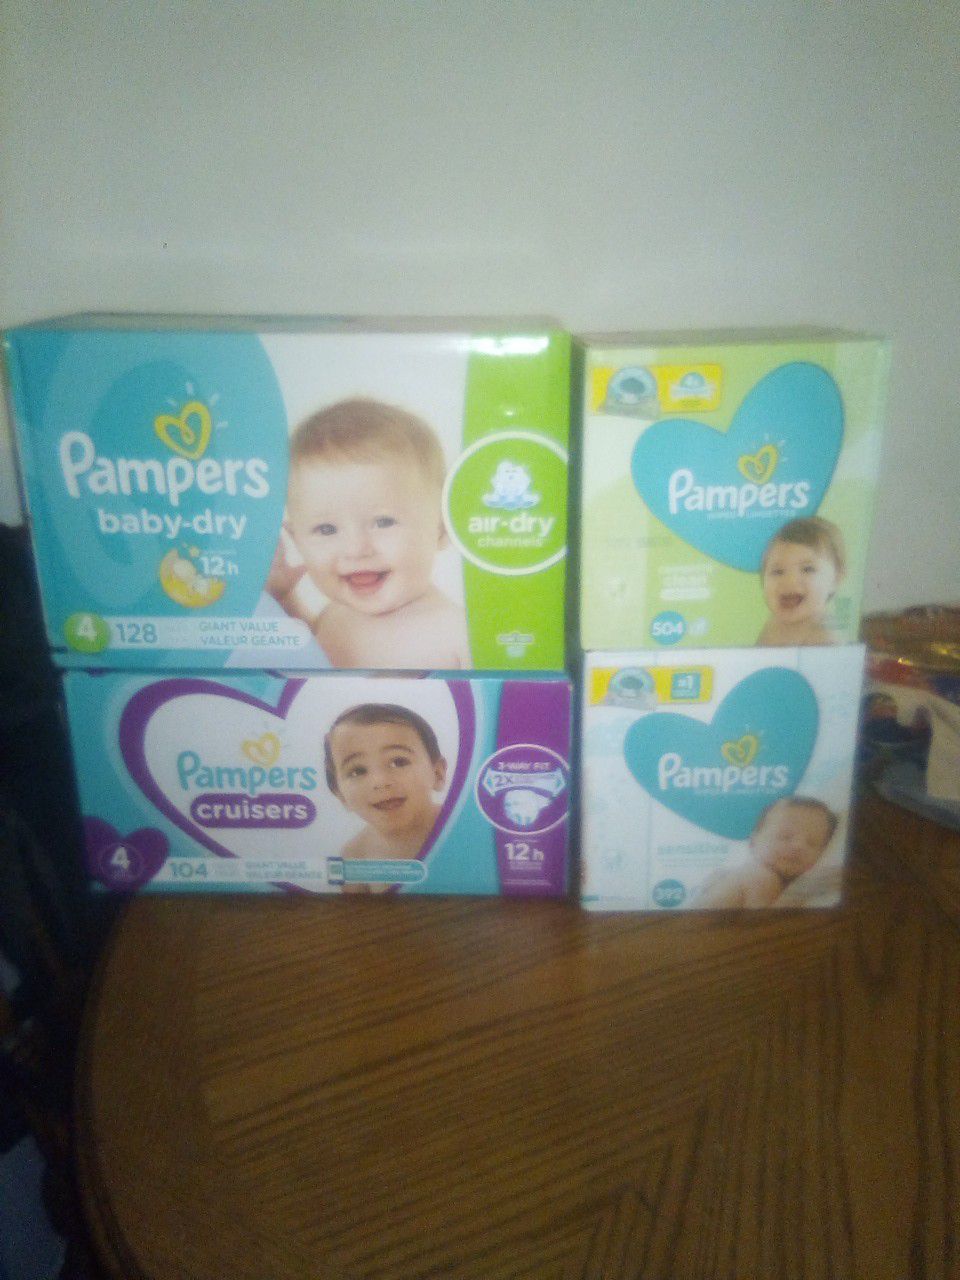 Pampers size 4, 128diapers, Pampers can cruisers size 4 104 diapers , Pampers wipes 2 boxes